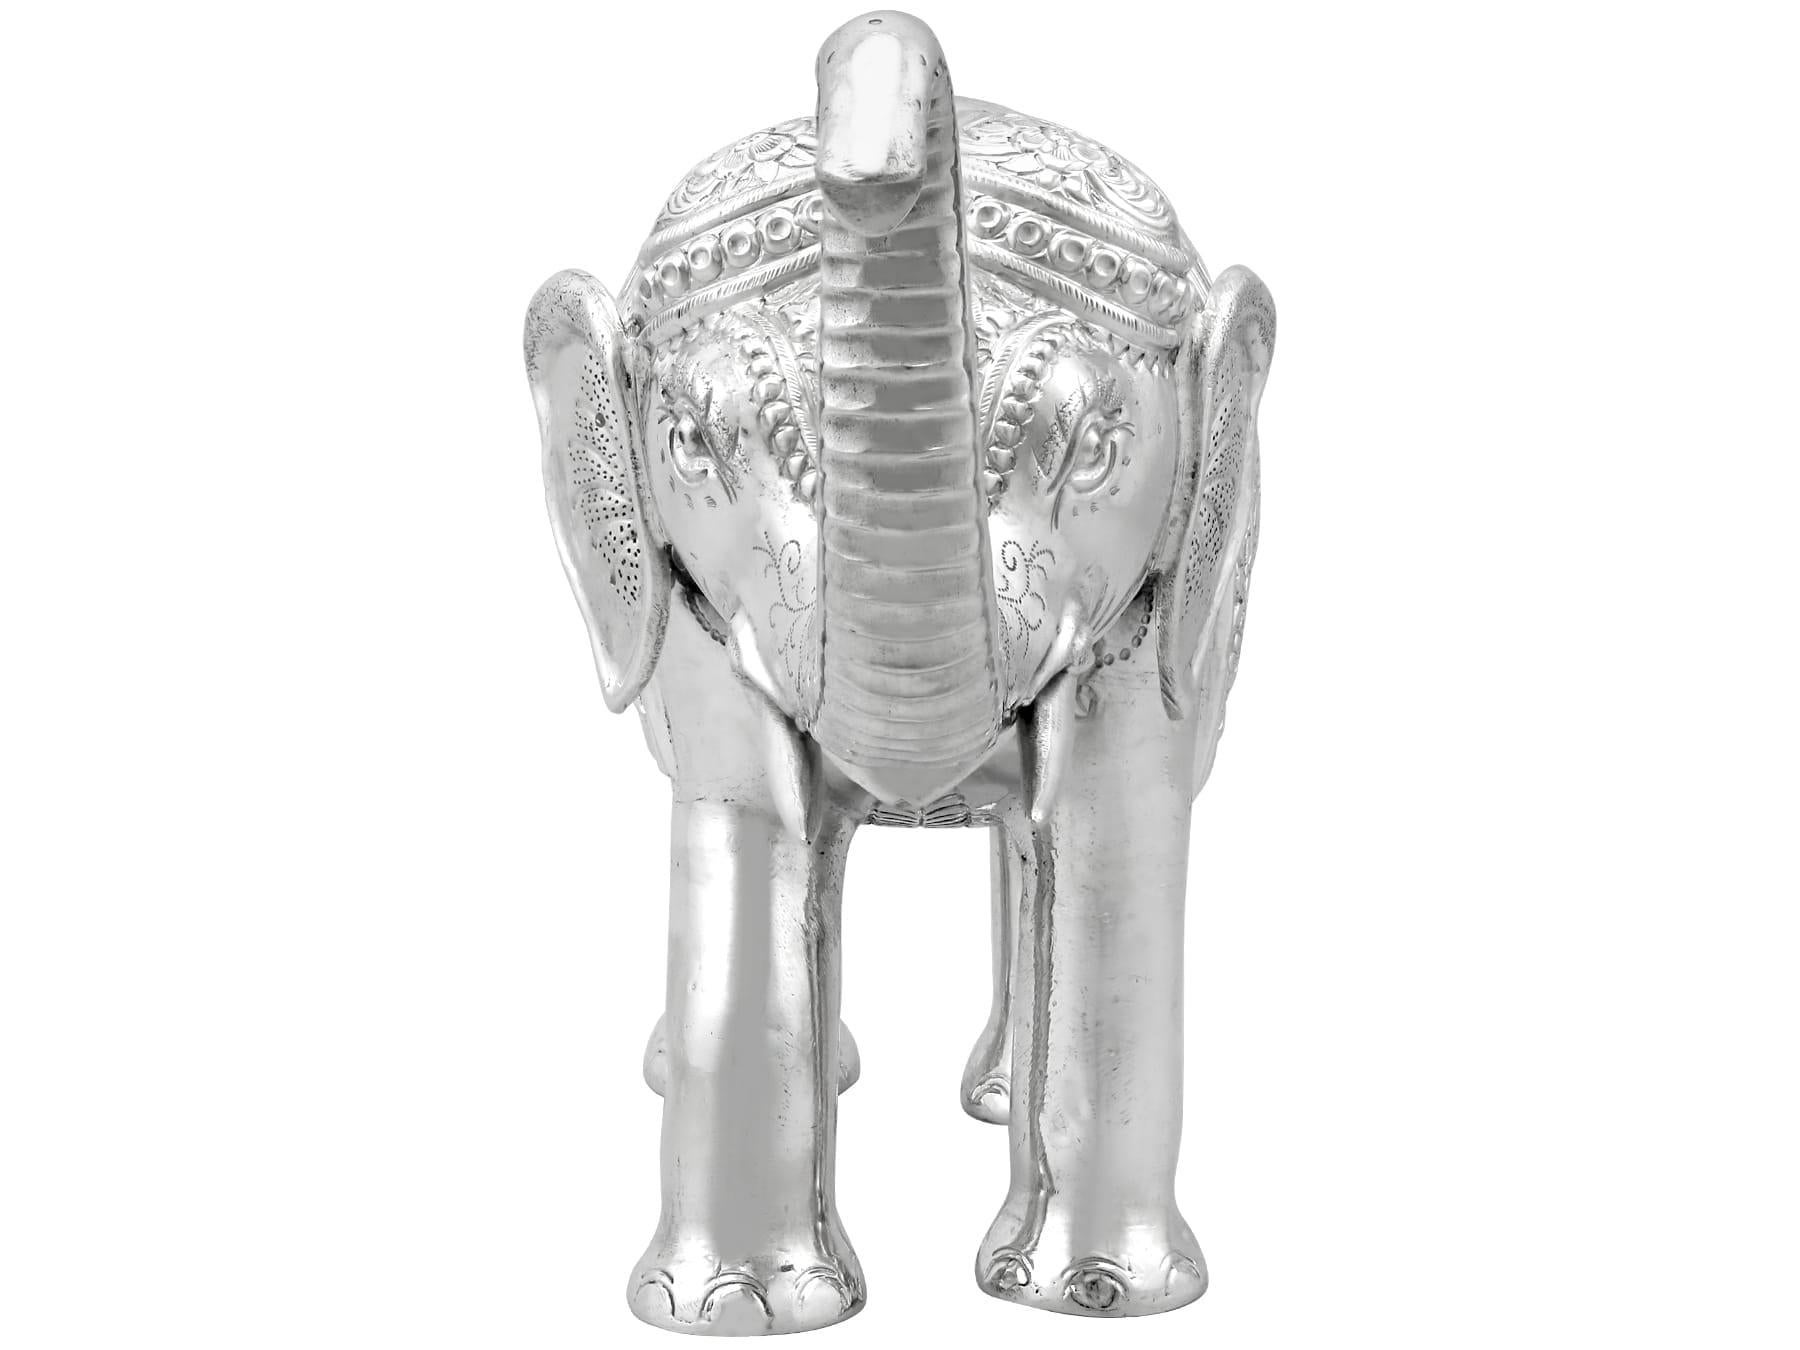 Vintage Indian Silver Elephant Table Ornament In Excellent Condition For Sale In Jesmond, Newcastle Upon Tyne